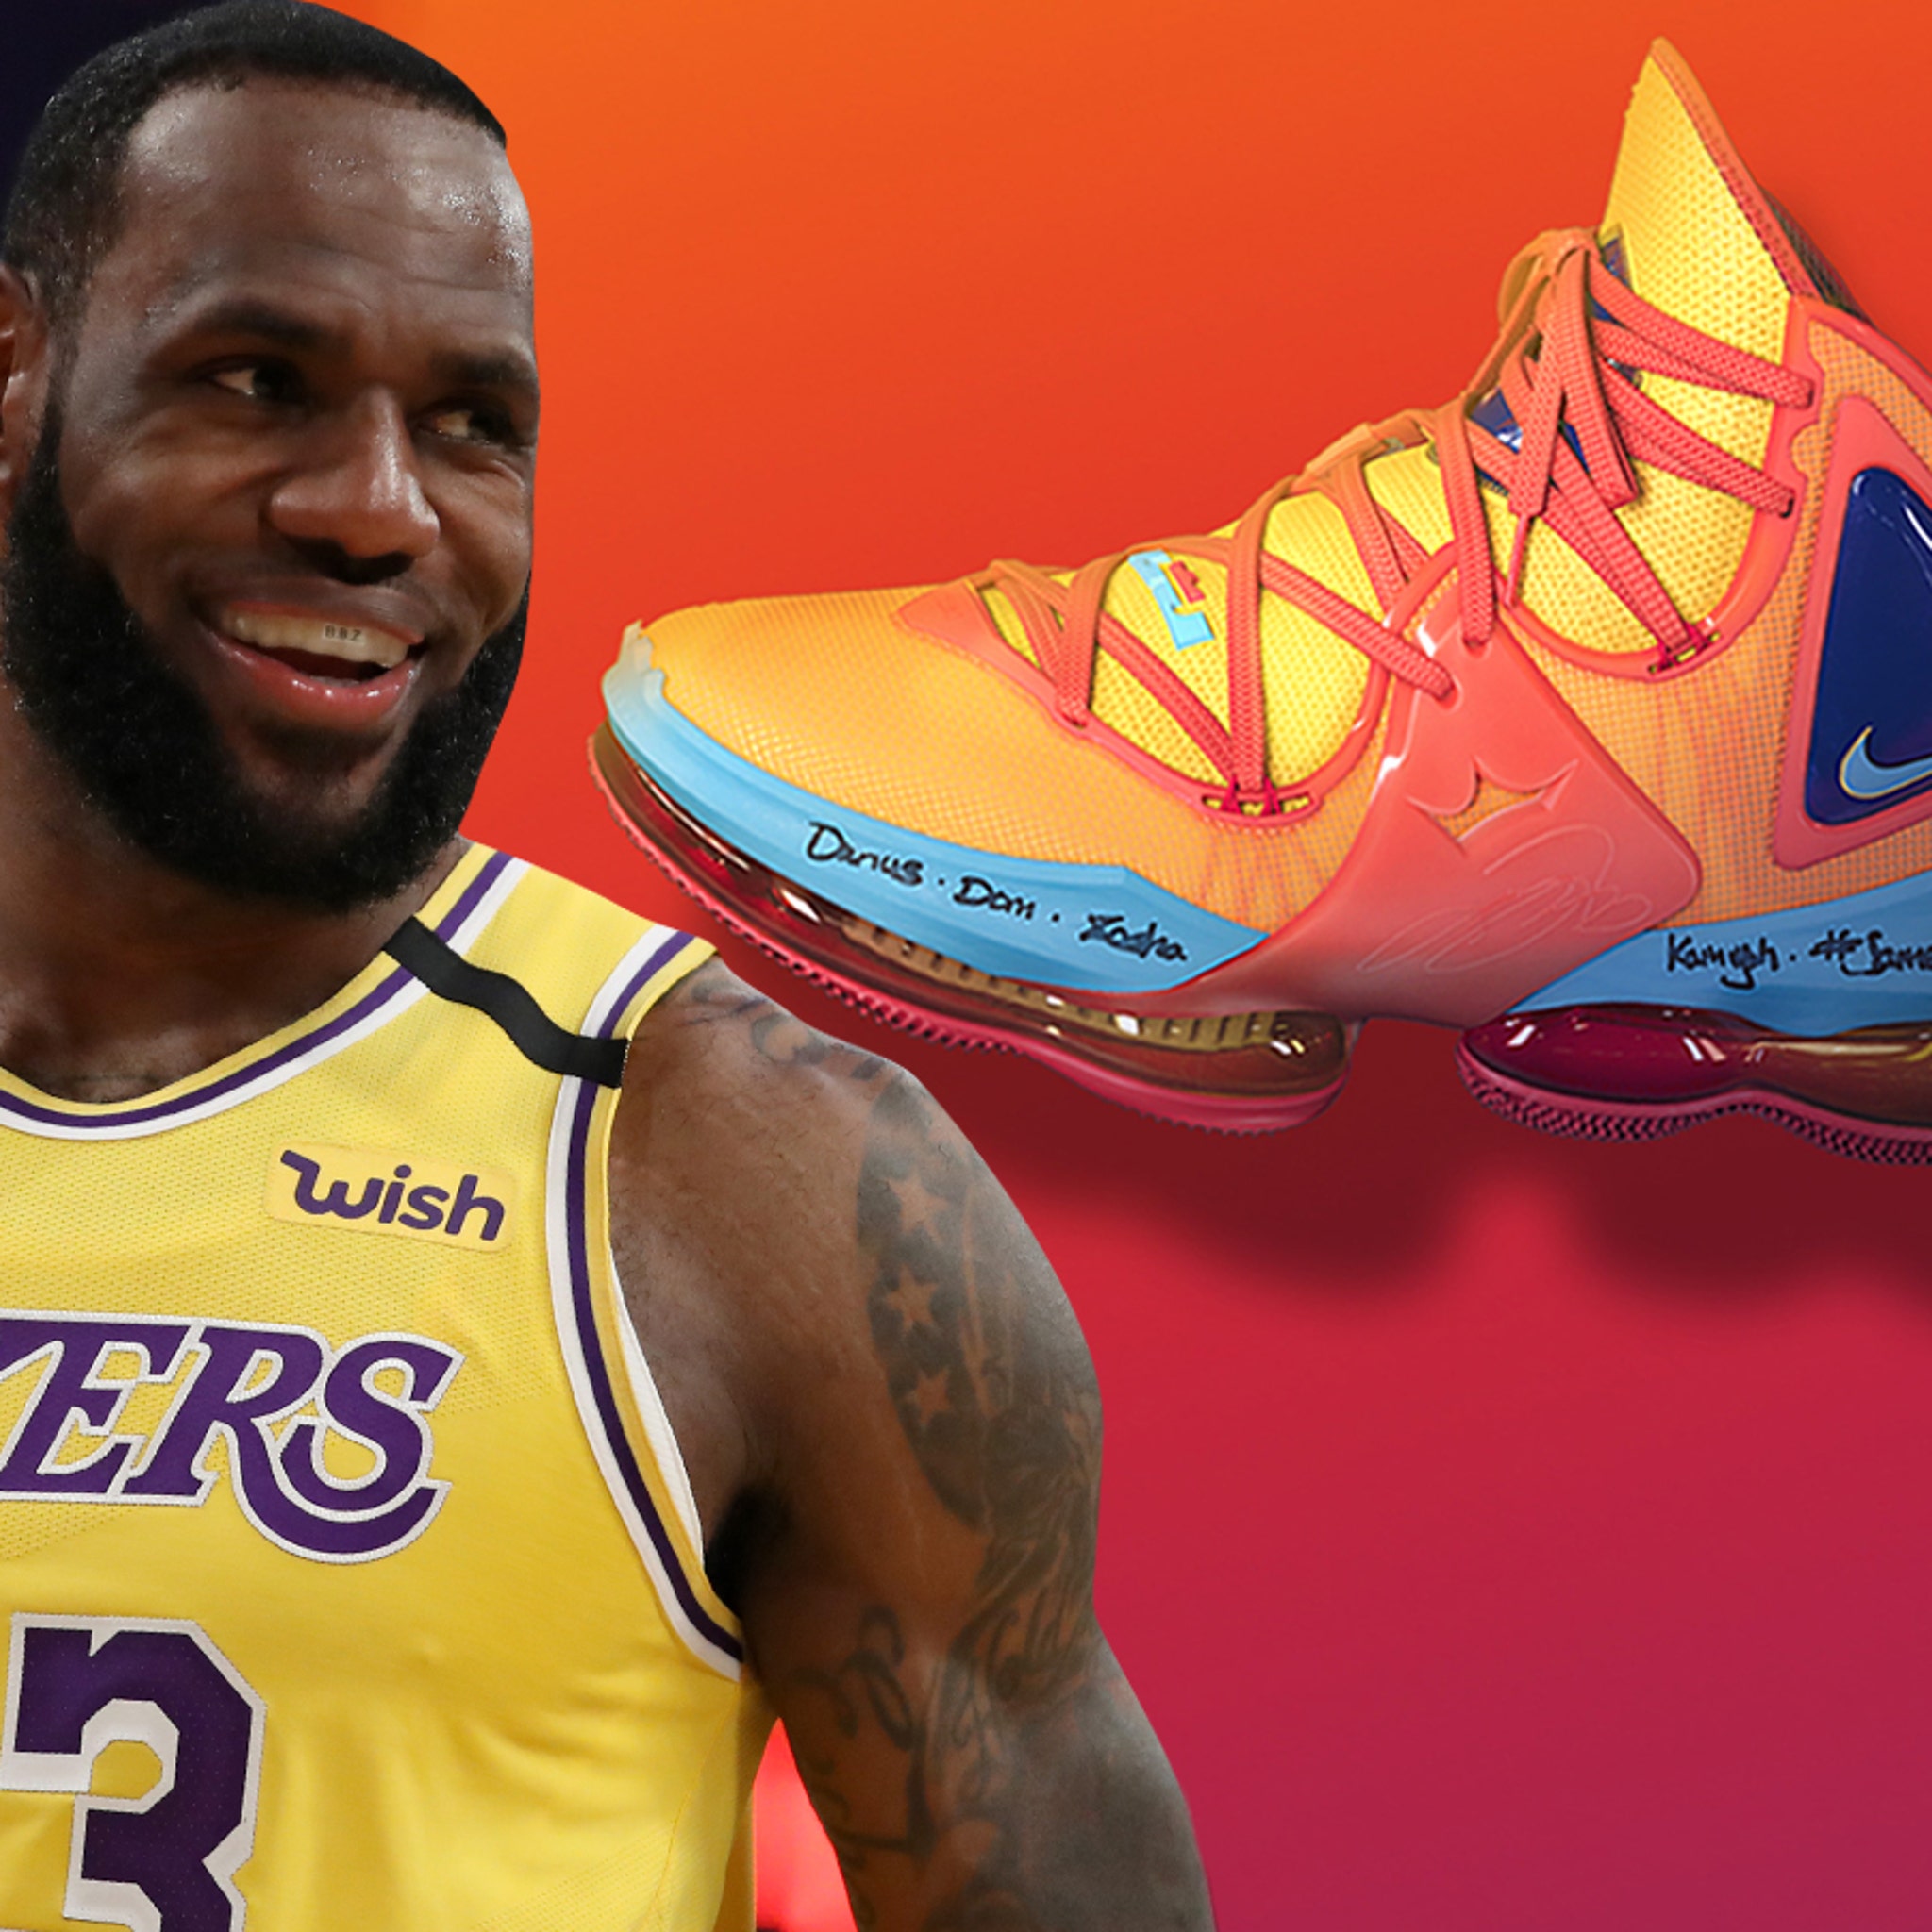 Nike Has Revealed 'Space Jam 2' Jerseys And Sneakers; LeBron James